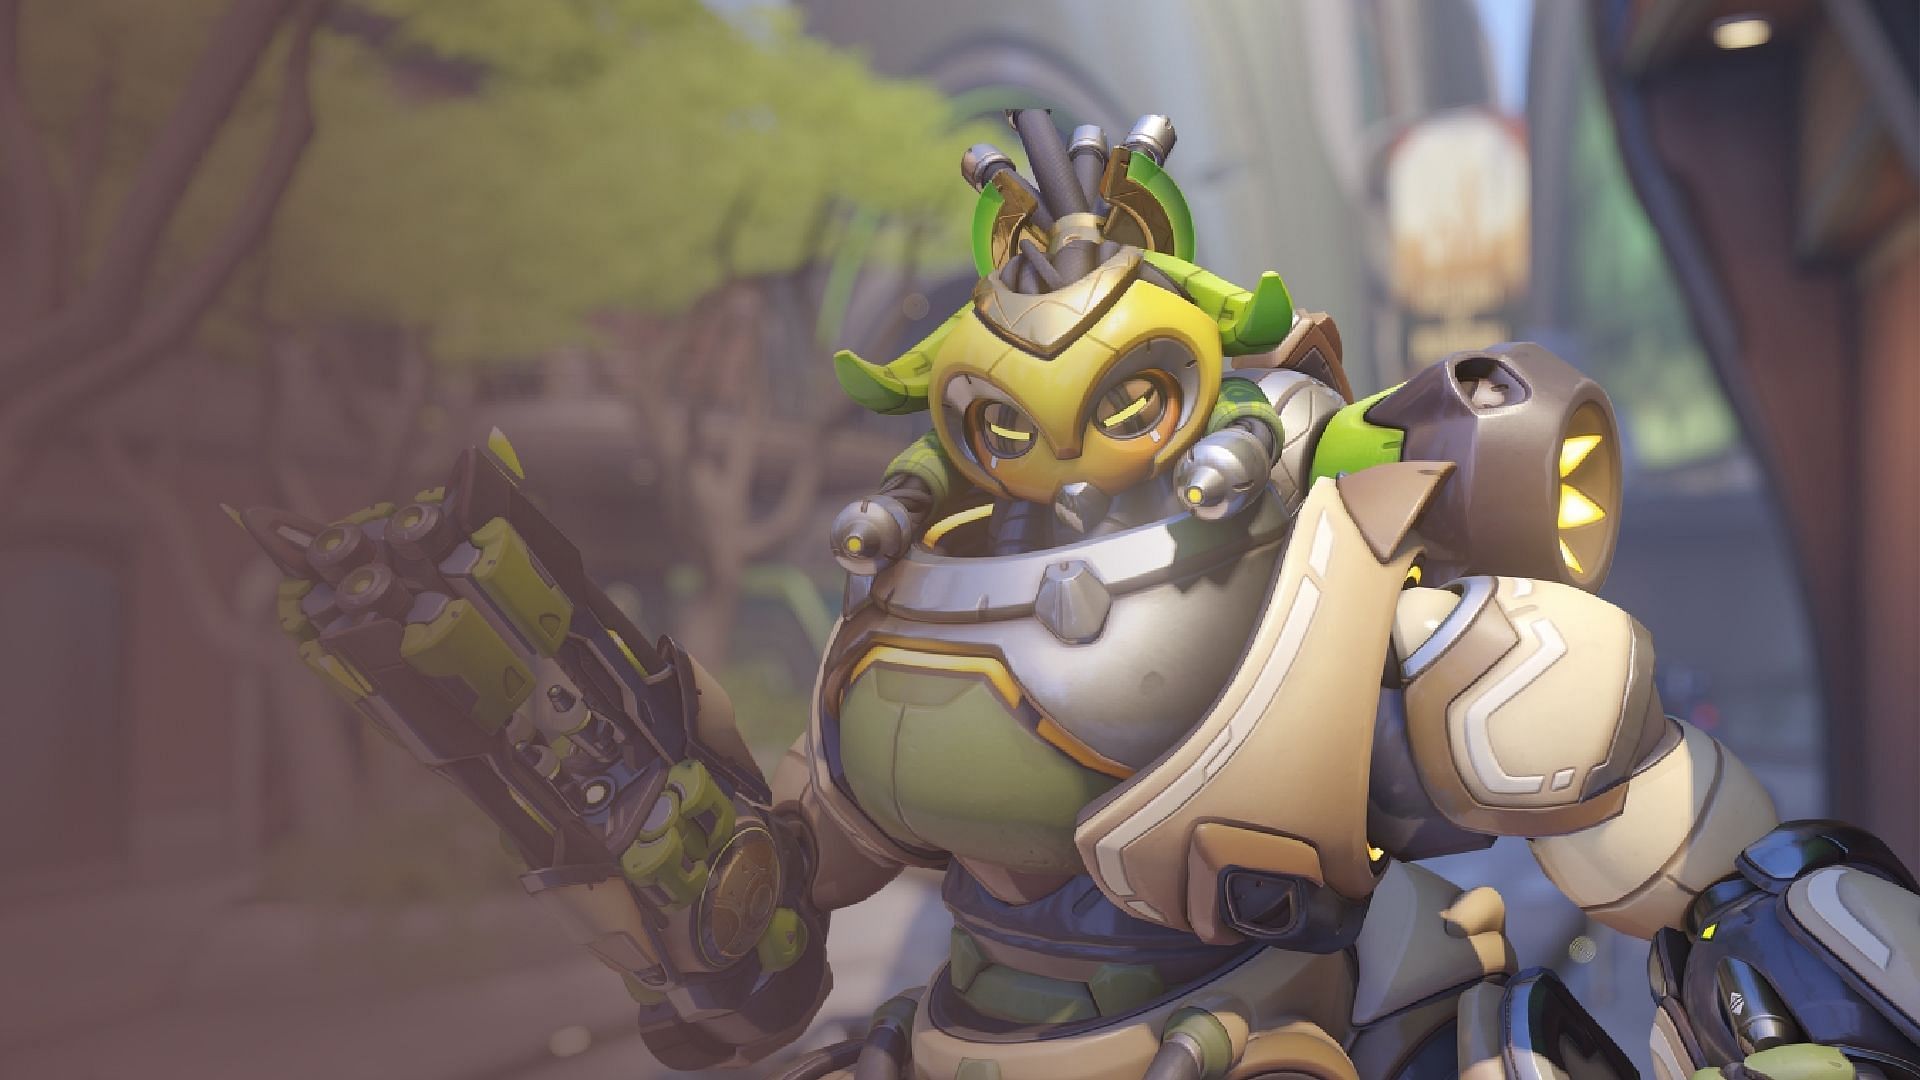 Official Twitter/X page of Overwatch unveils the new Mythic Orisa skin (Image via Blizzard Entertainment)